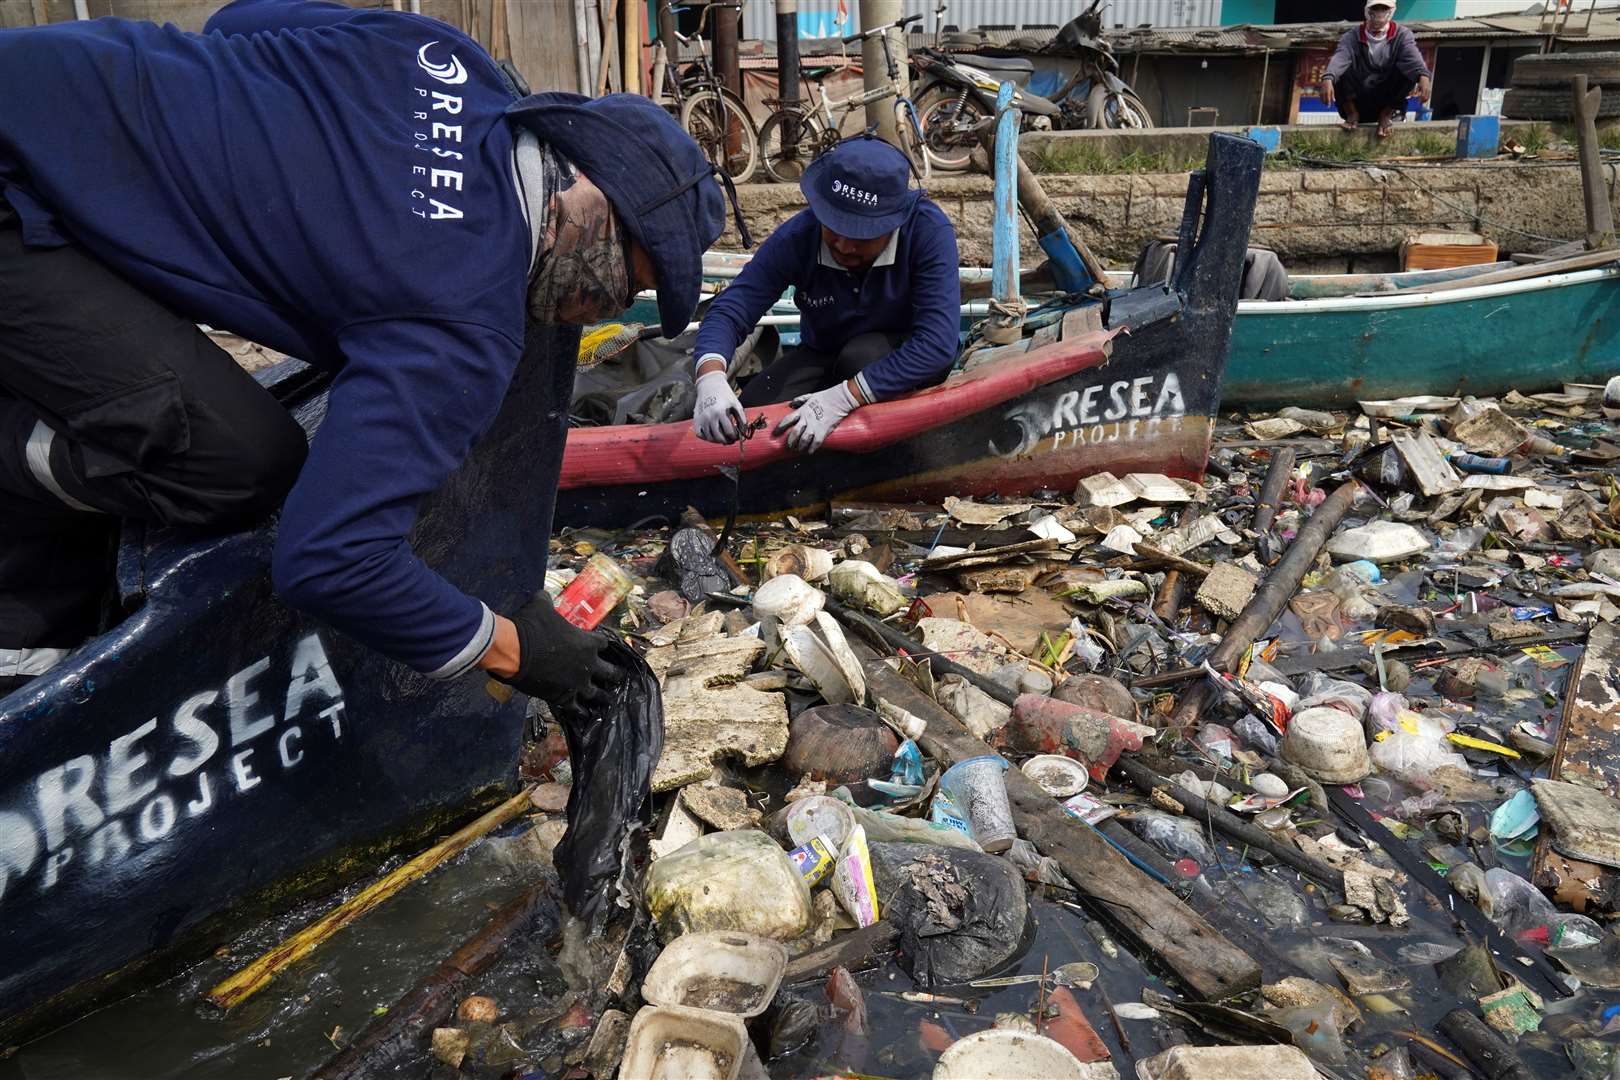 Workers from Danish firm, ReSea Project, collecting plastic waste in Indonesia (Owen Humphreys/PA)